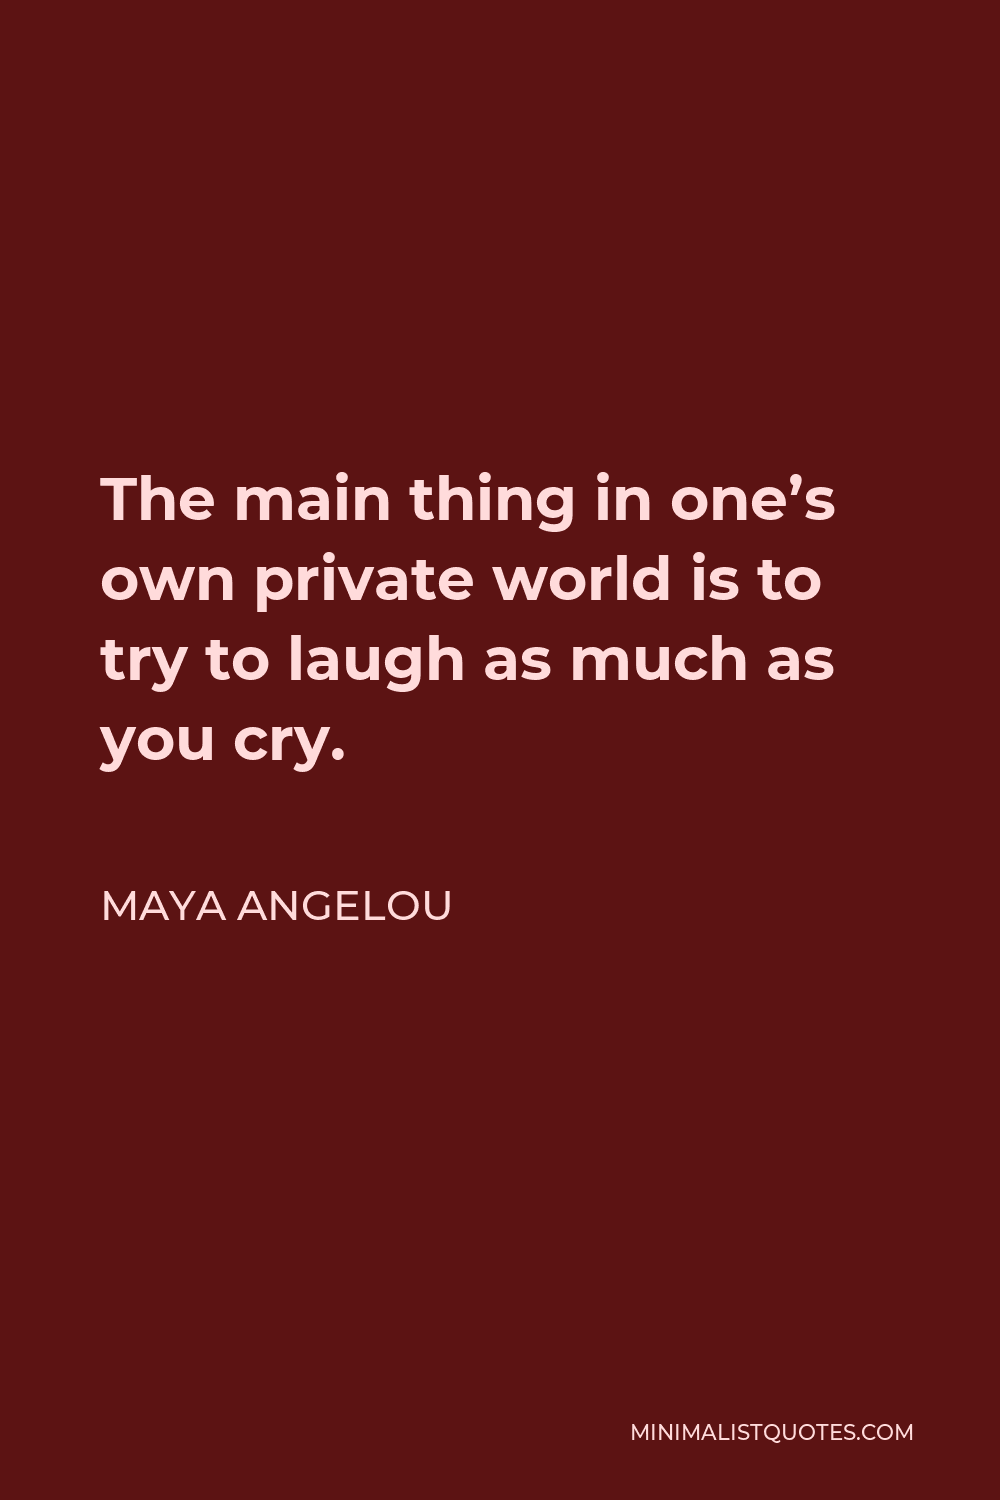 Maya Angelou Quote - The main thing in one’s own private world is to try to laugh as much as you cry.